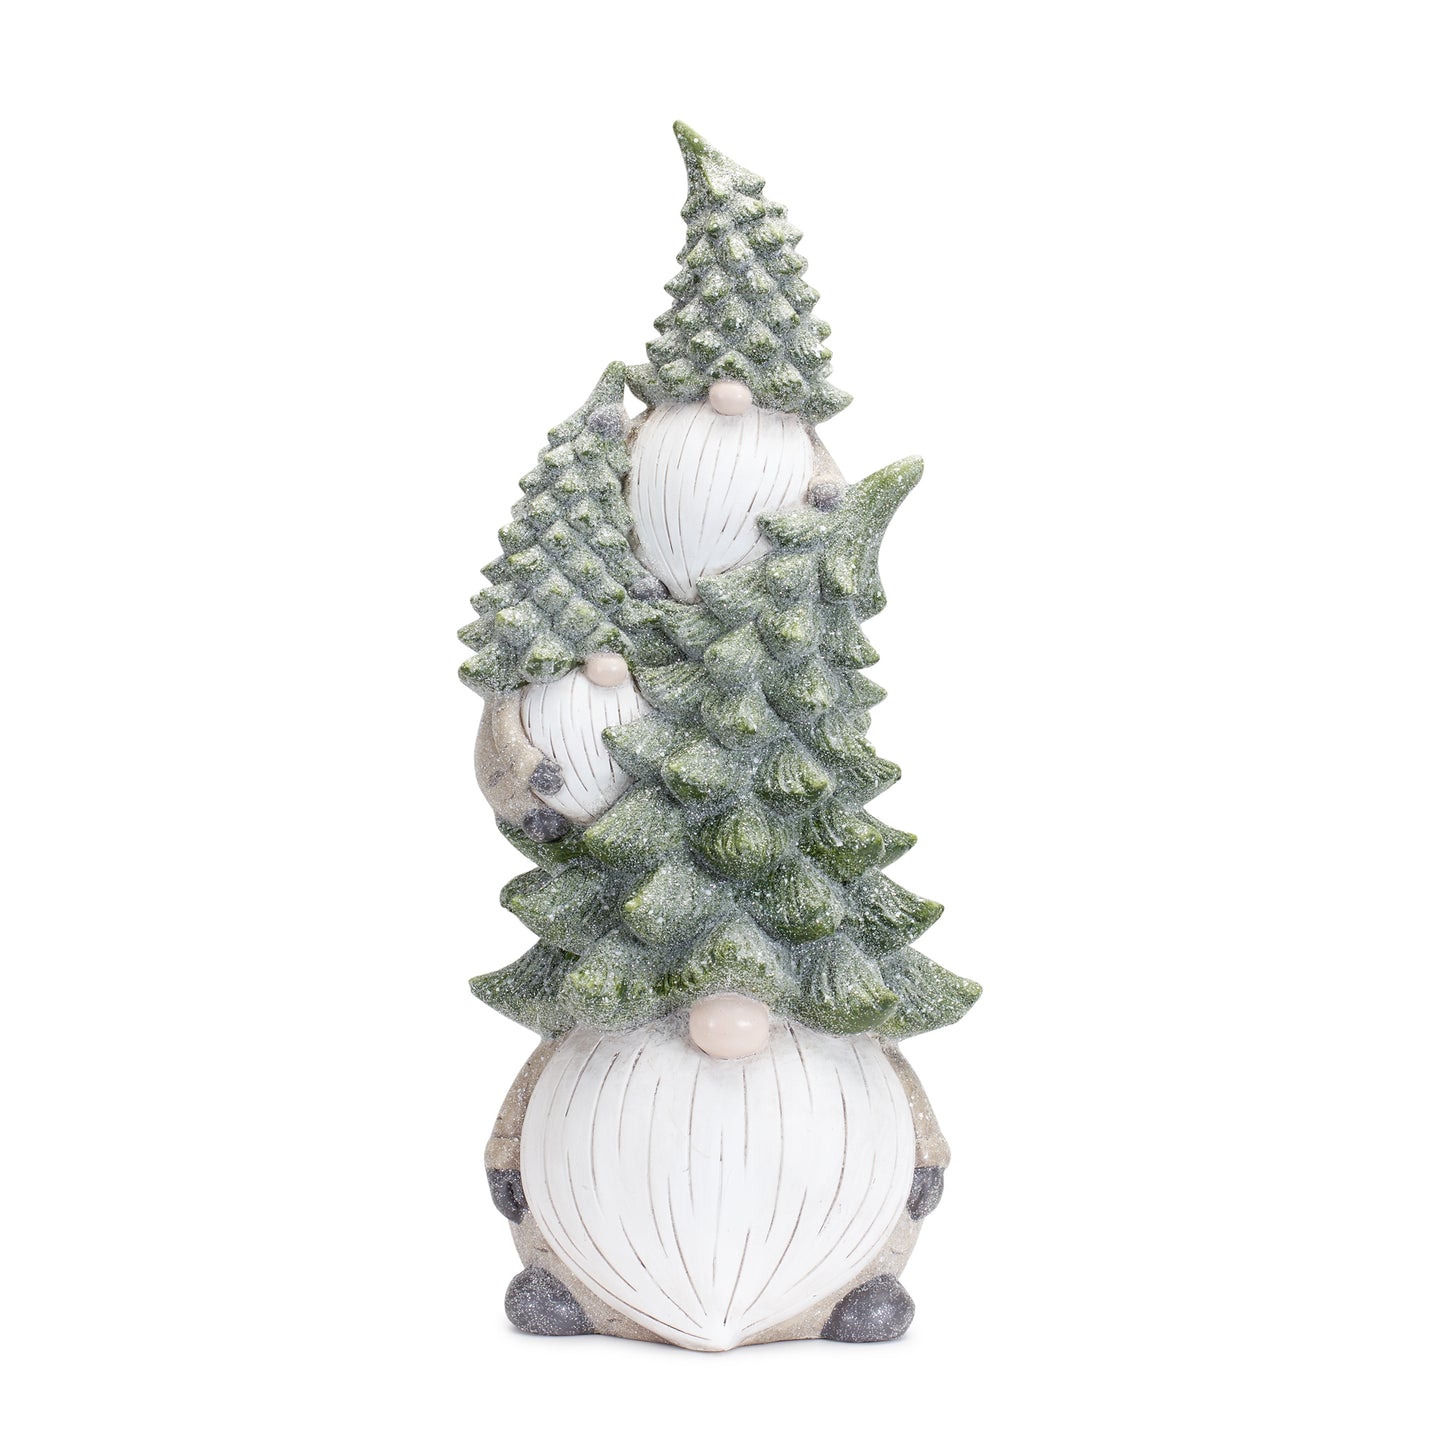 Stone Holiday Gnome Stack with Pine Tree Hat 23.25"H